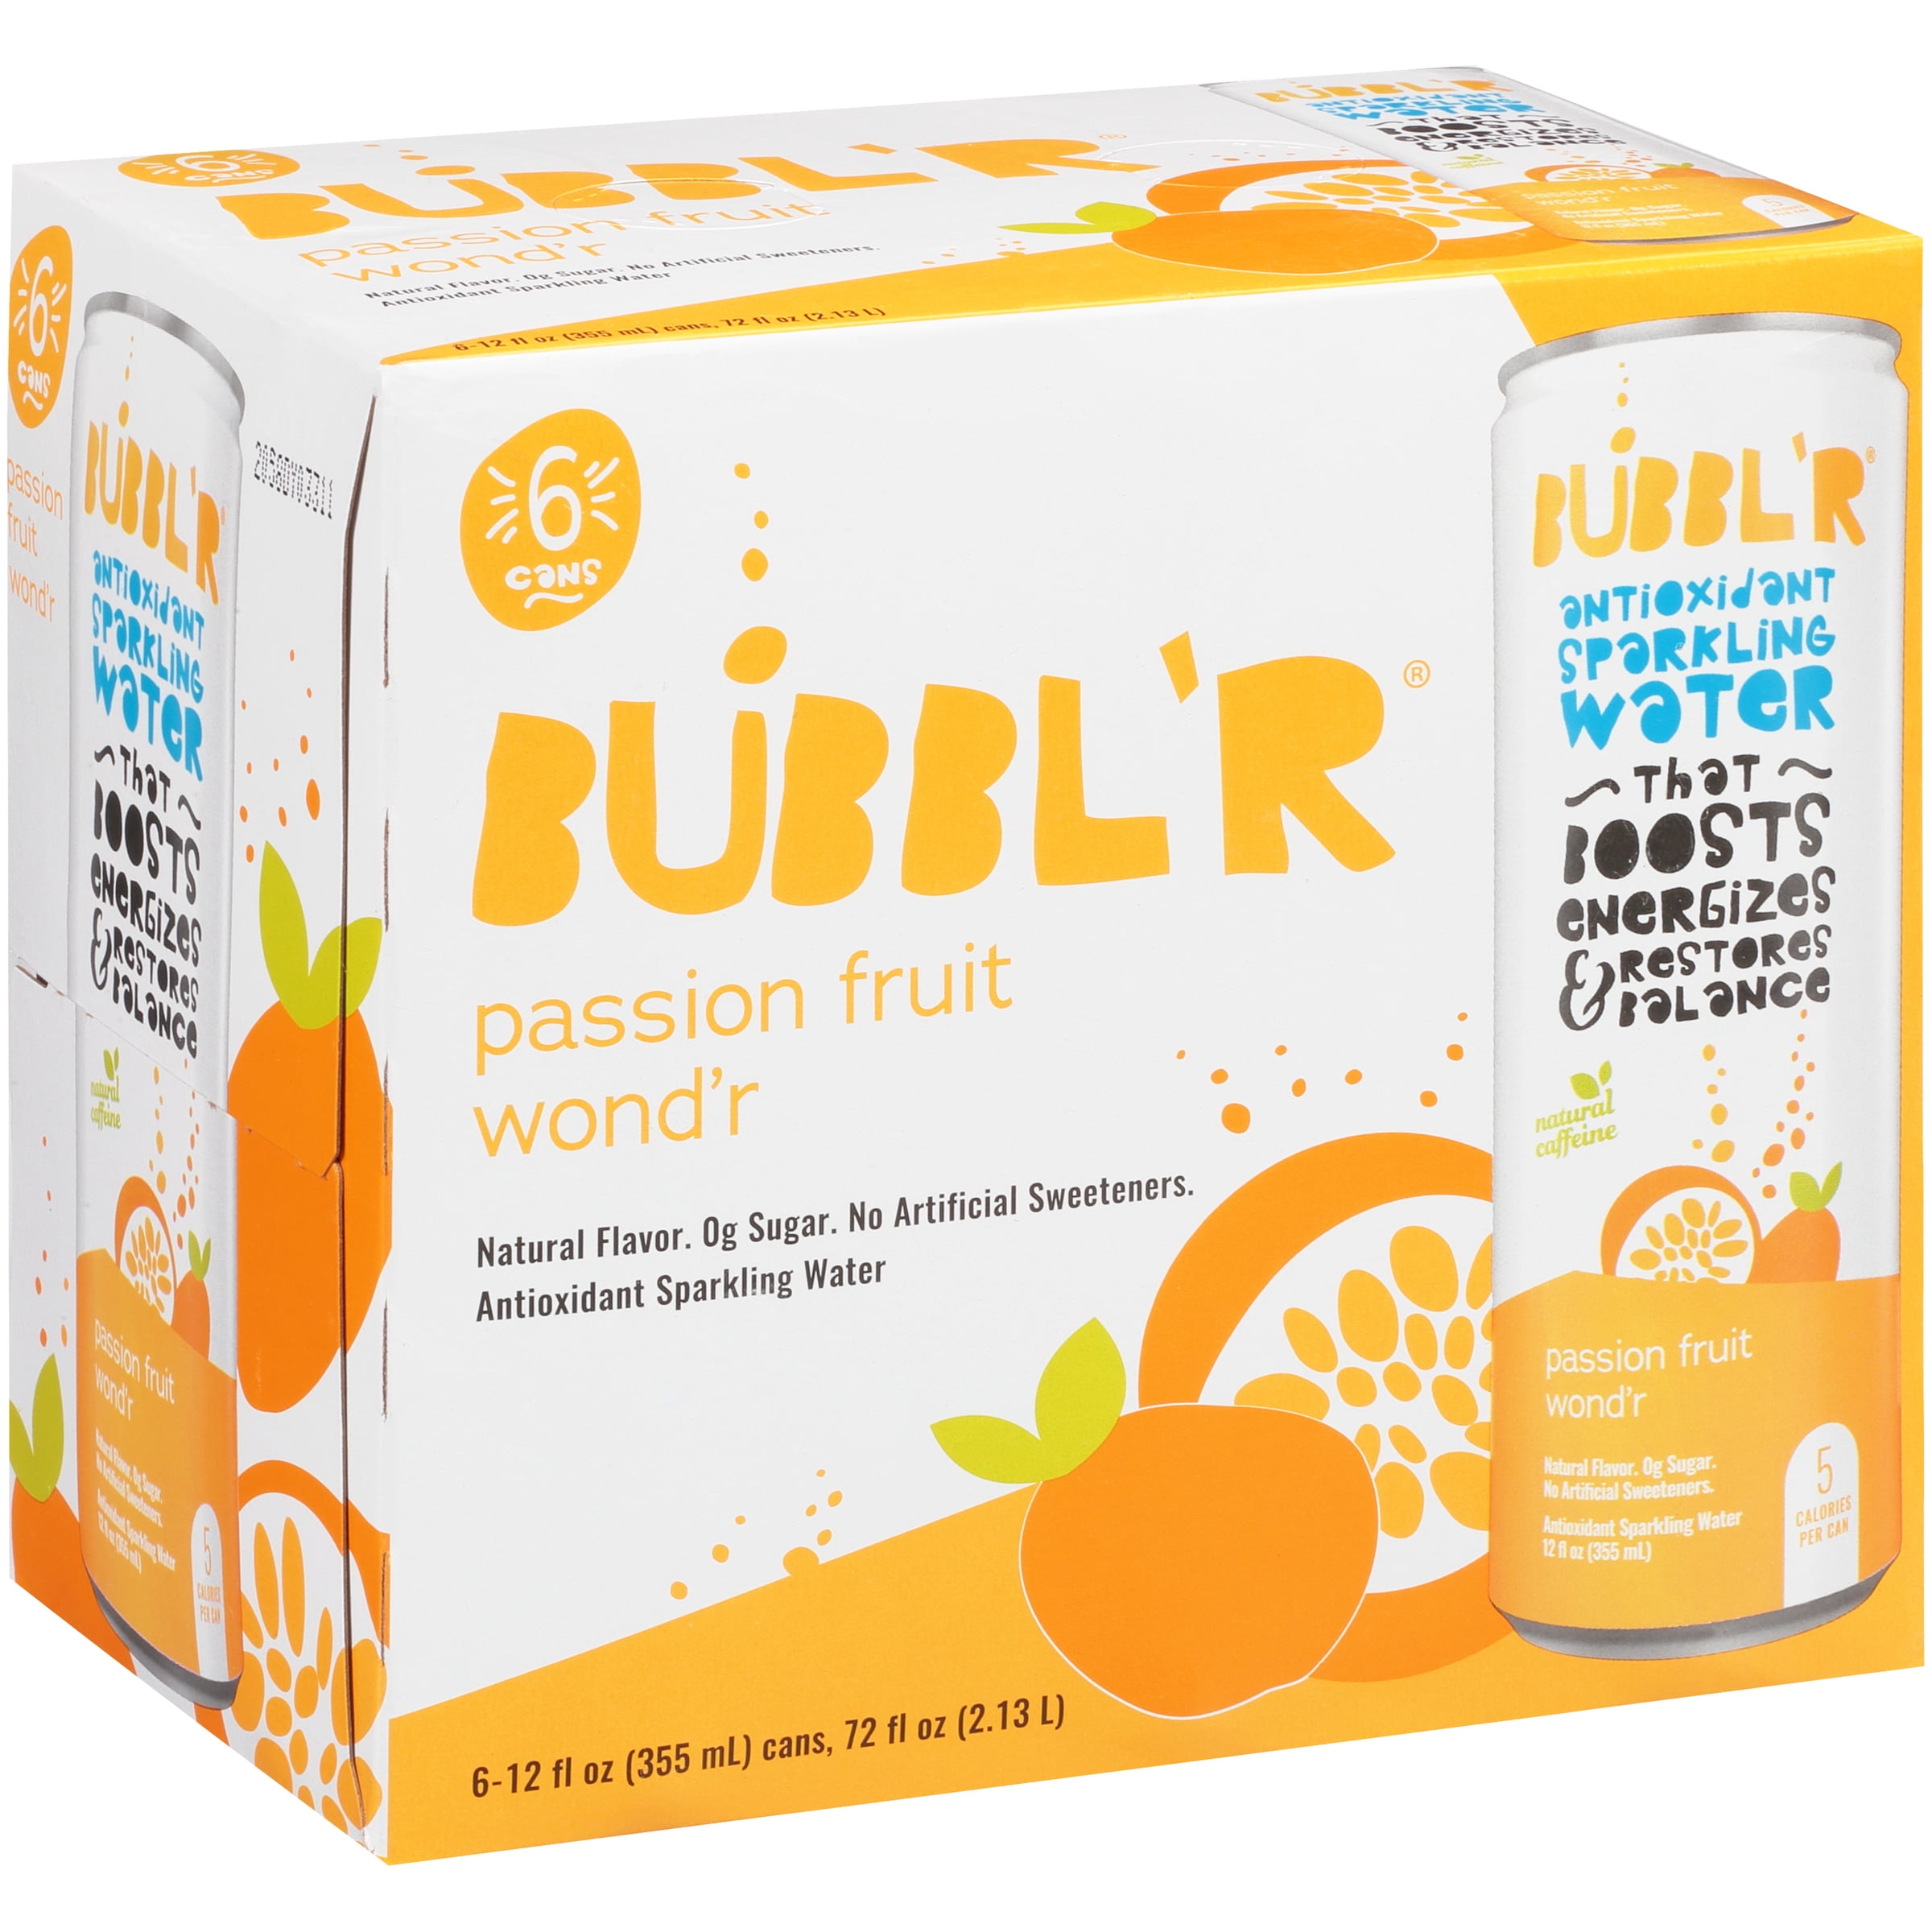 bubbl-r-passion-fruit-12oz-can-6pk-4-antioxidant-sparkling-water-with